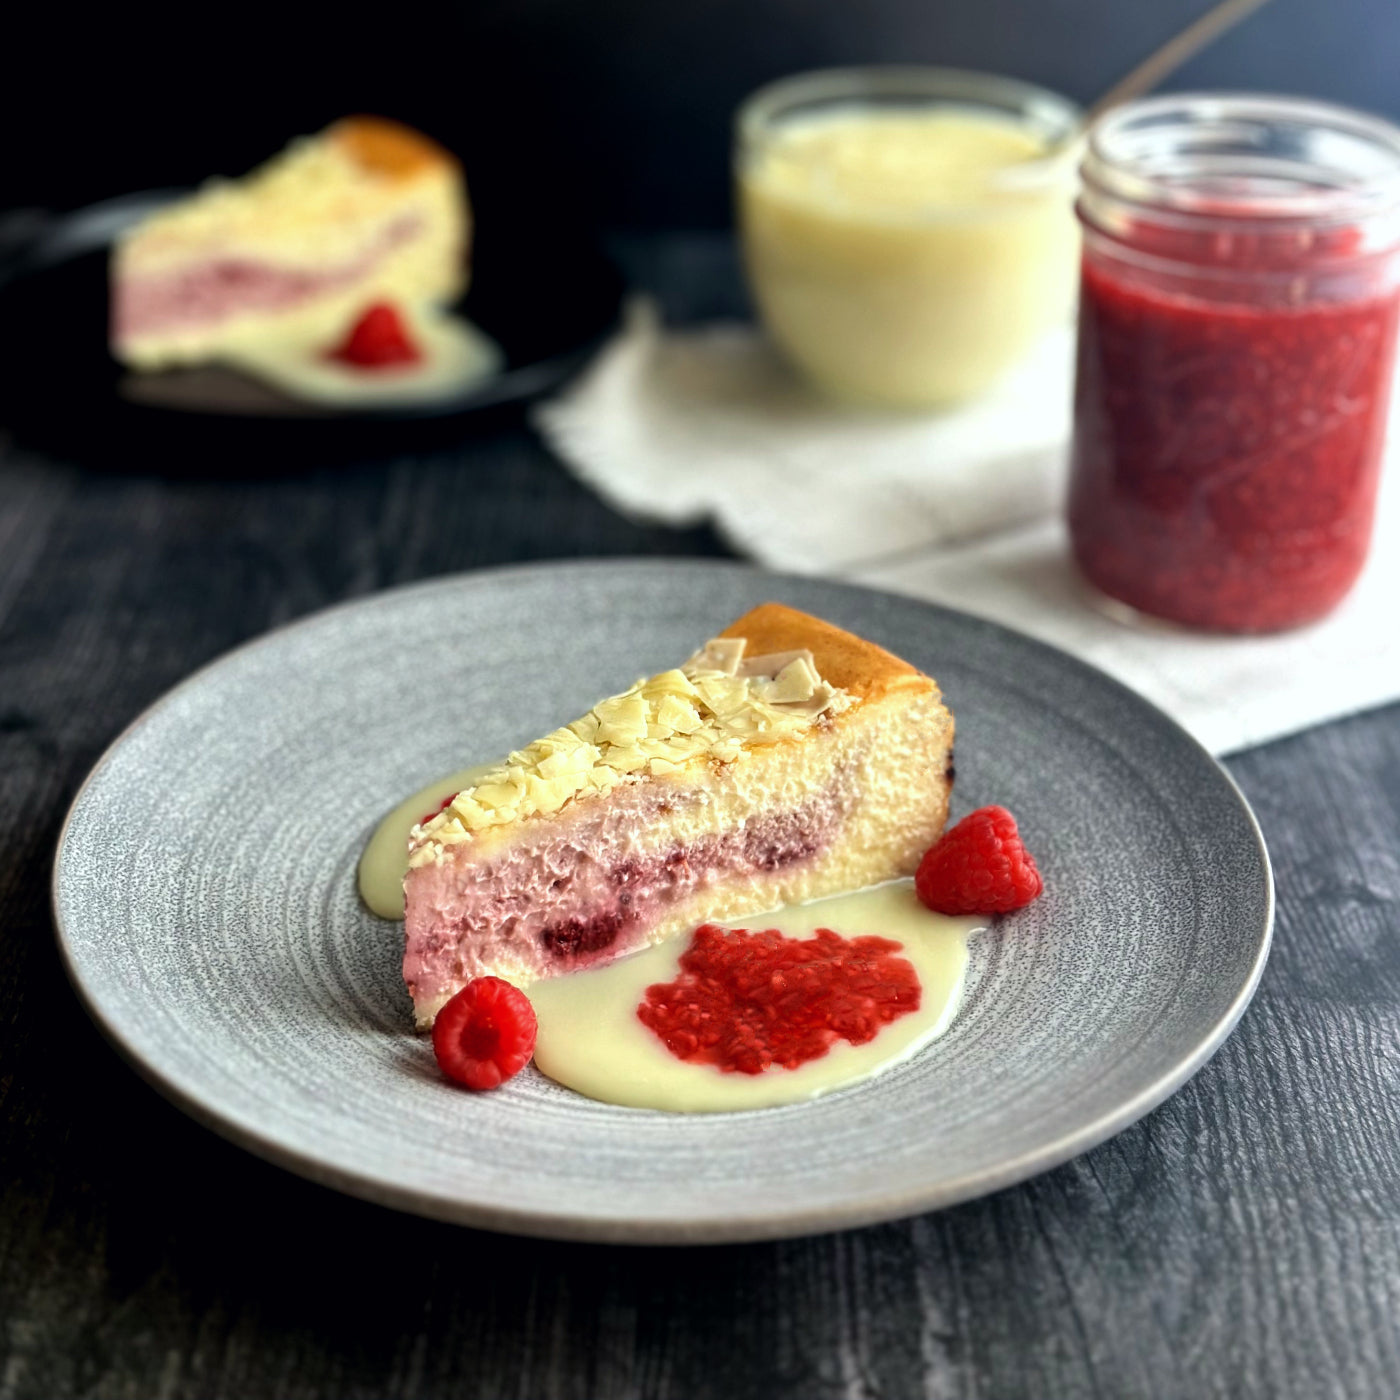 Velvety slice of white chocolate raspberry cheesecake with an elegant layer of handcrafted raspberry filling, topped with white chocolate shavings, all sitting on a delicious puddle of homemade white chocolate and raspberry sauces